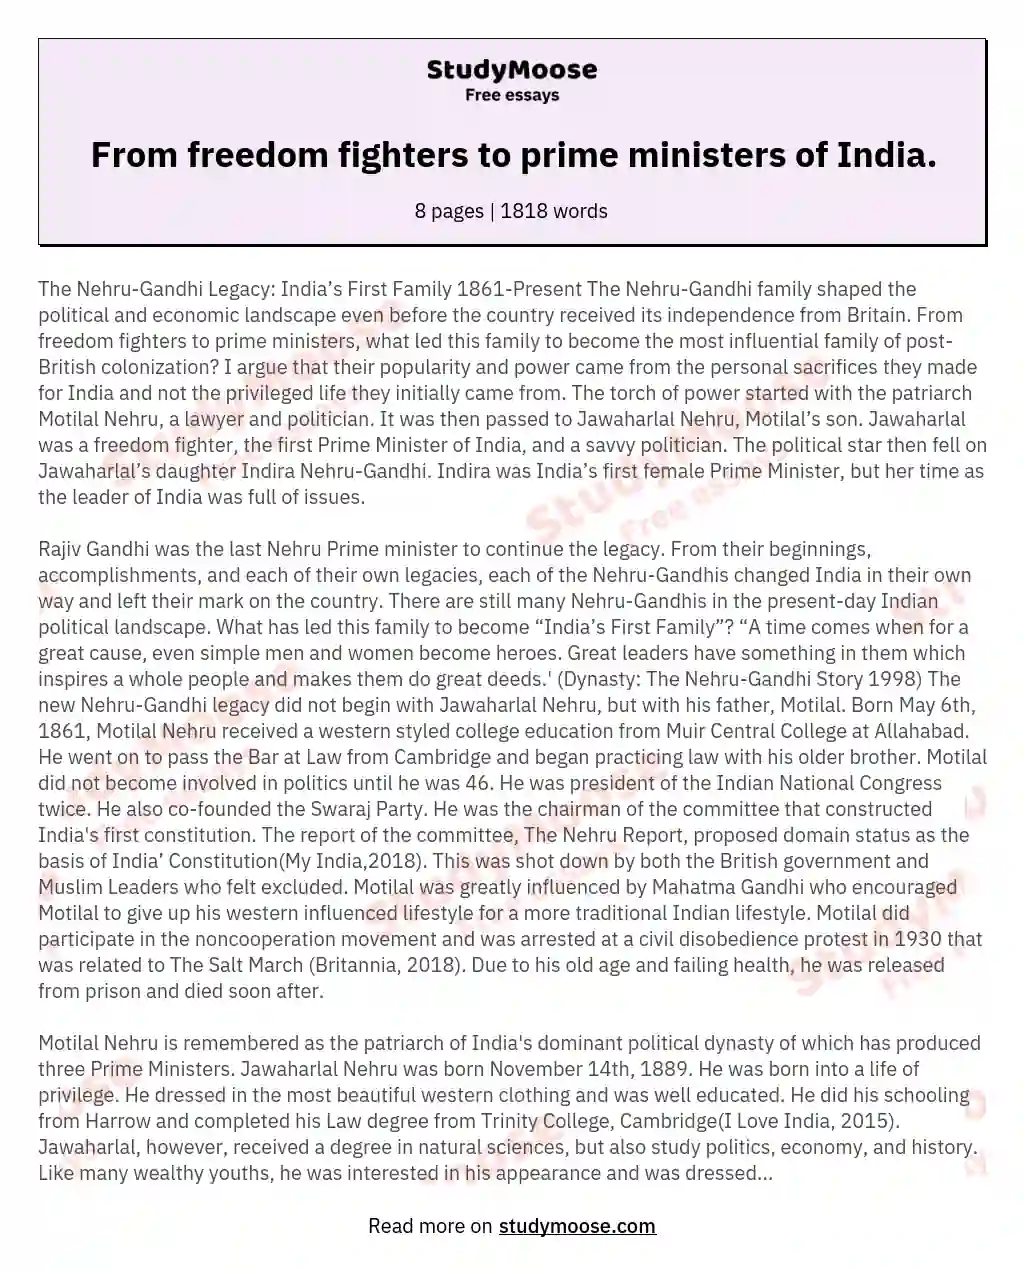 From freedom fighters to prime ministers of India. essay